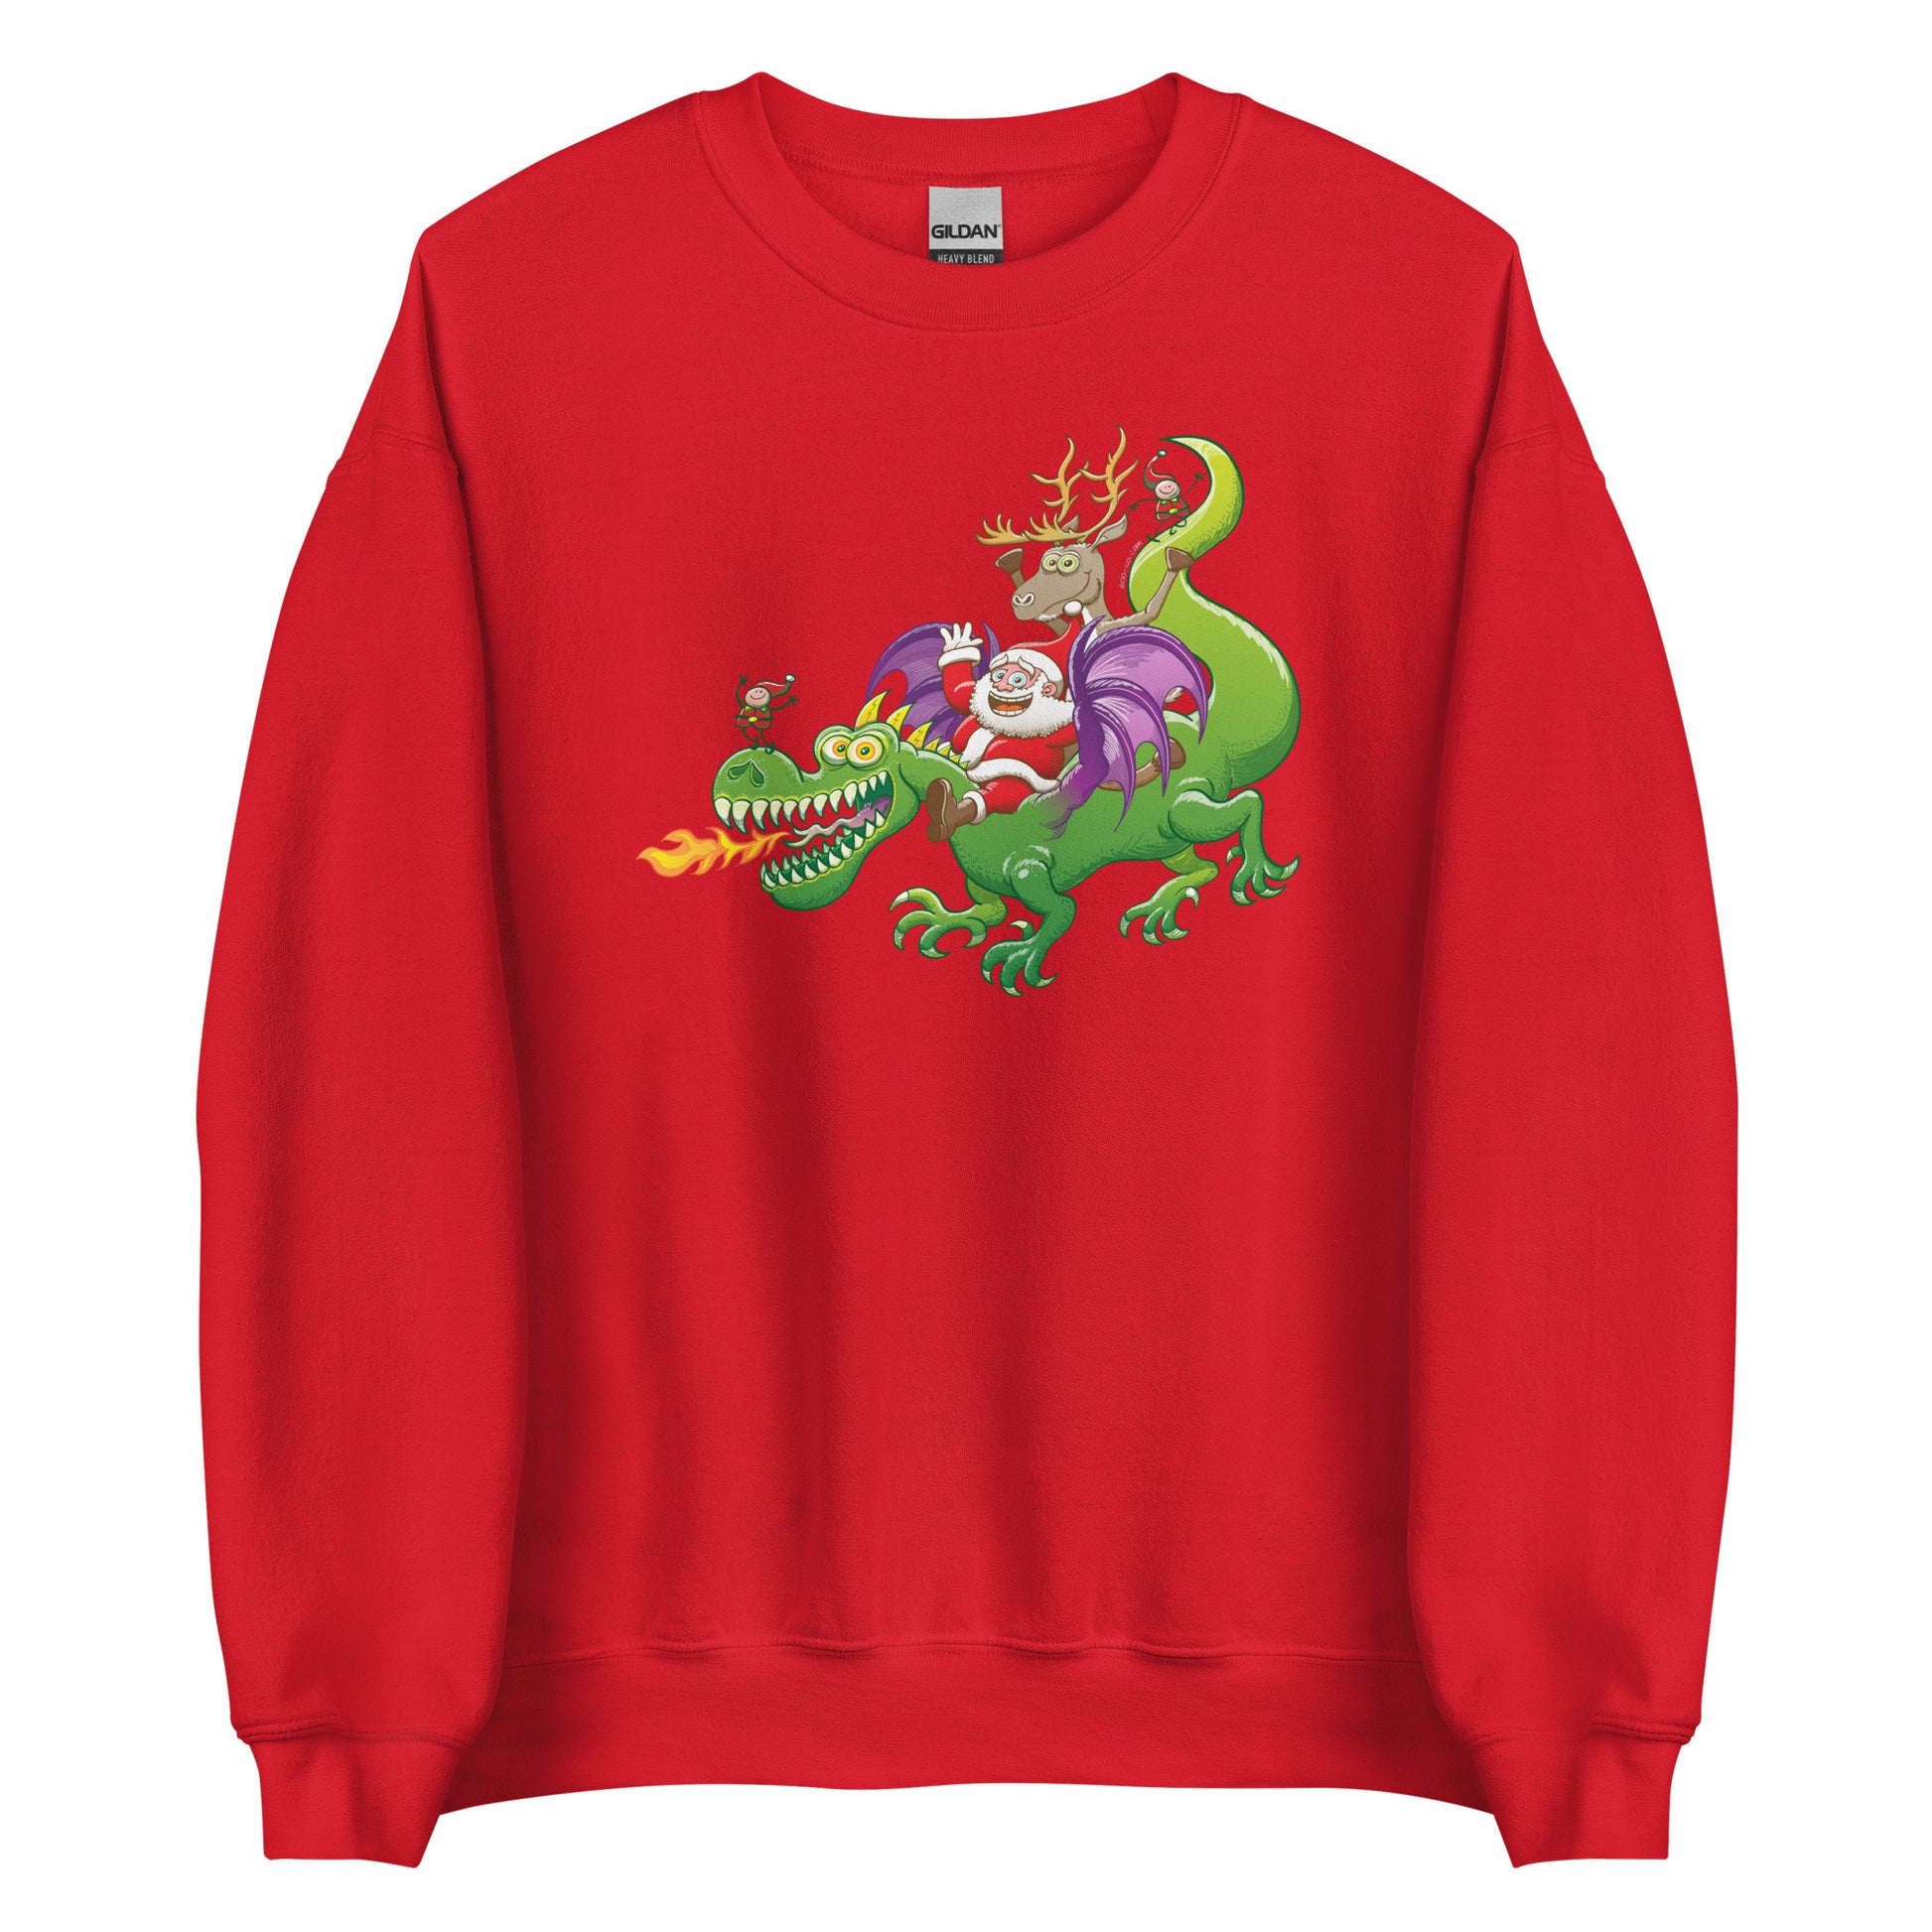 Santa's Dragon-Powered Christmas: A Holiday Adventure - Unisex Sweatshirt. Red. Front view